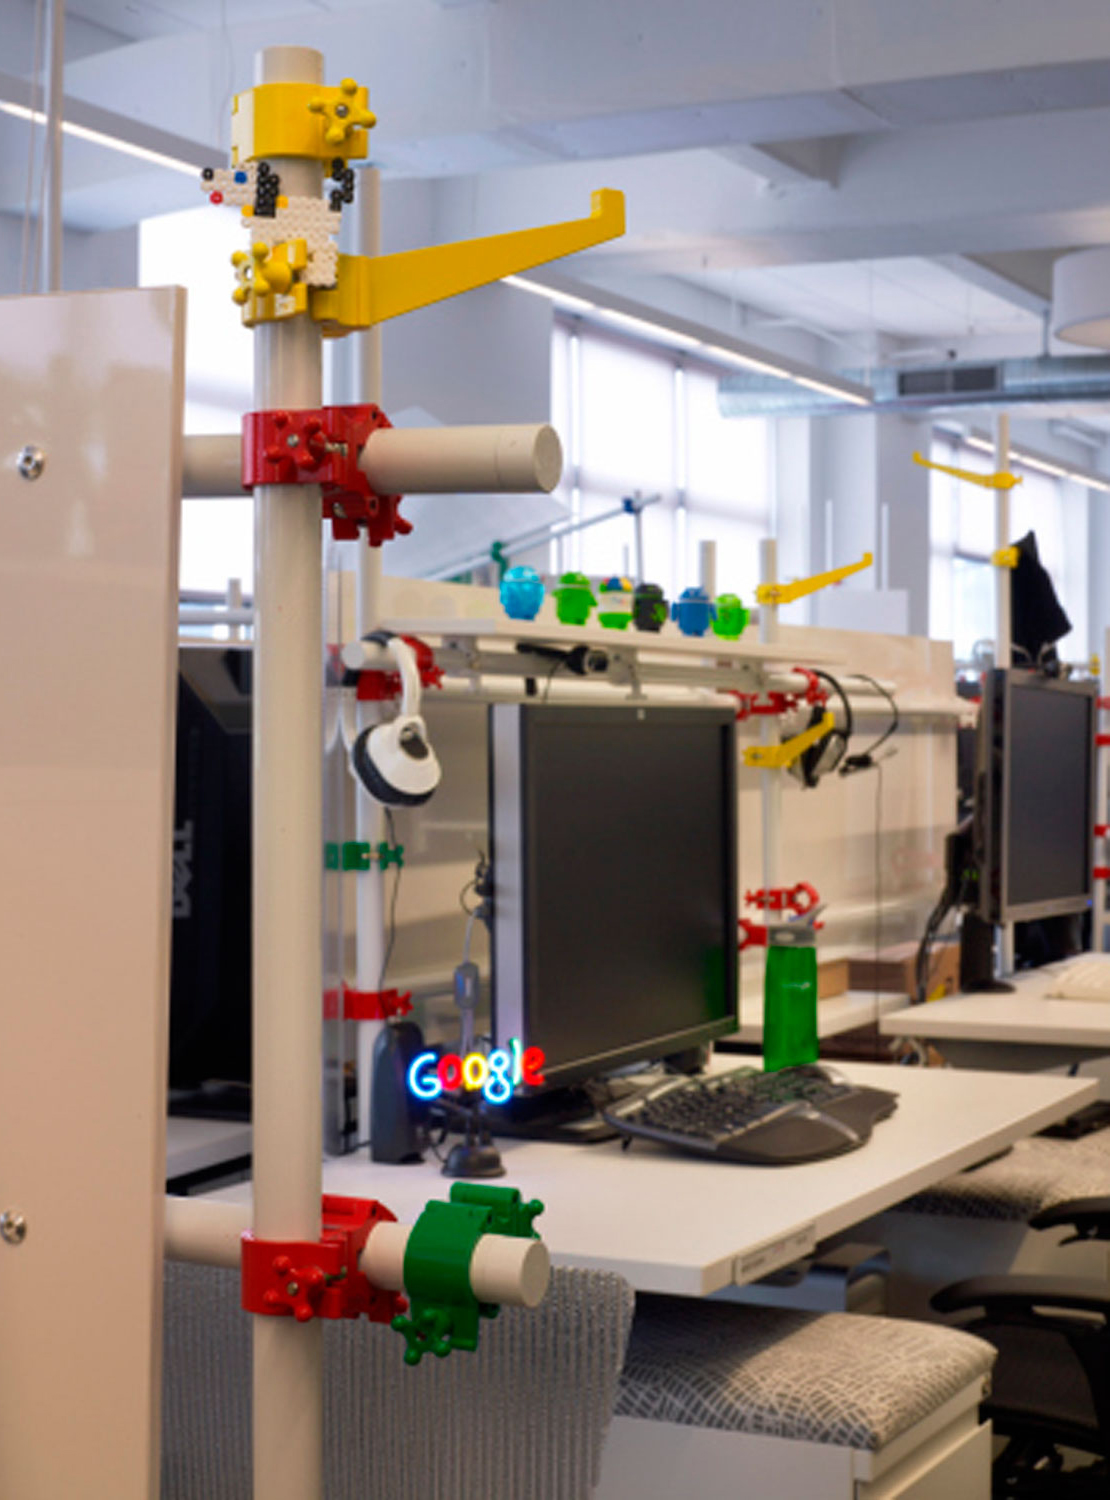 Google's build-your-own desks that allow employees to completely customize their workspaces.